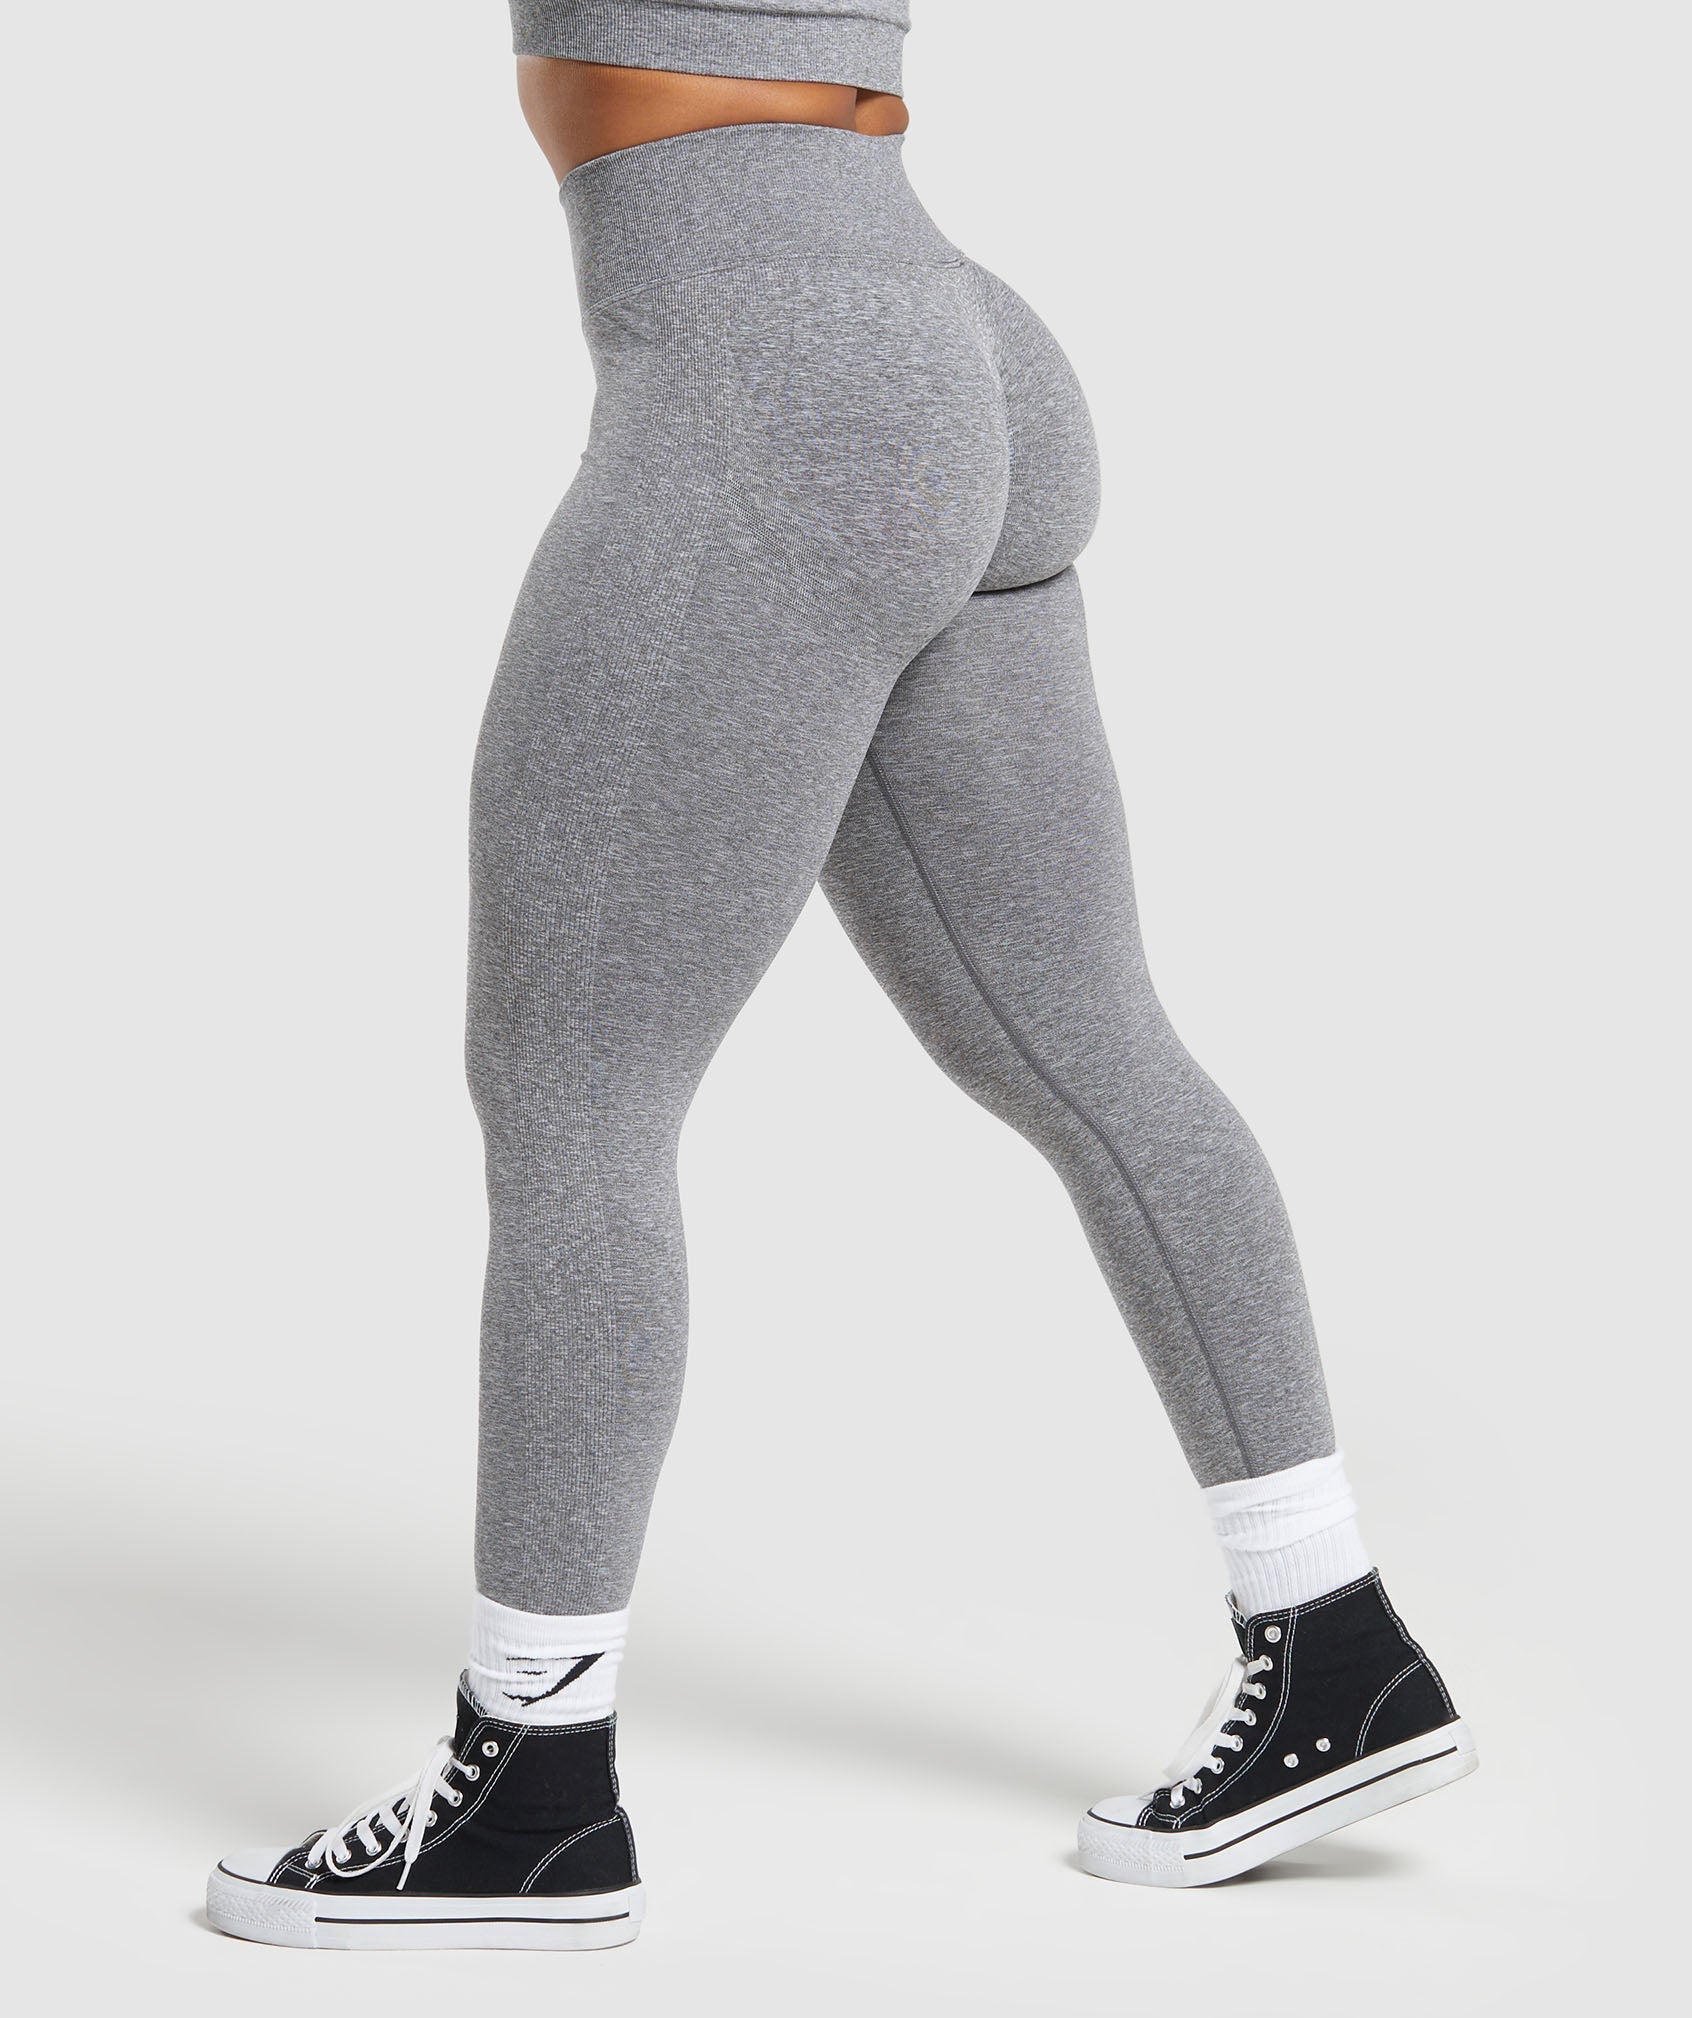 Lift Contour Seamless Leggings in Brushed Grey/White Marl - view 3